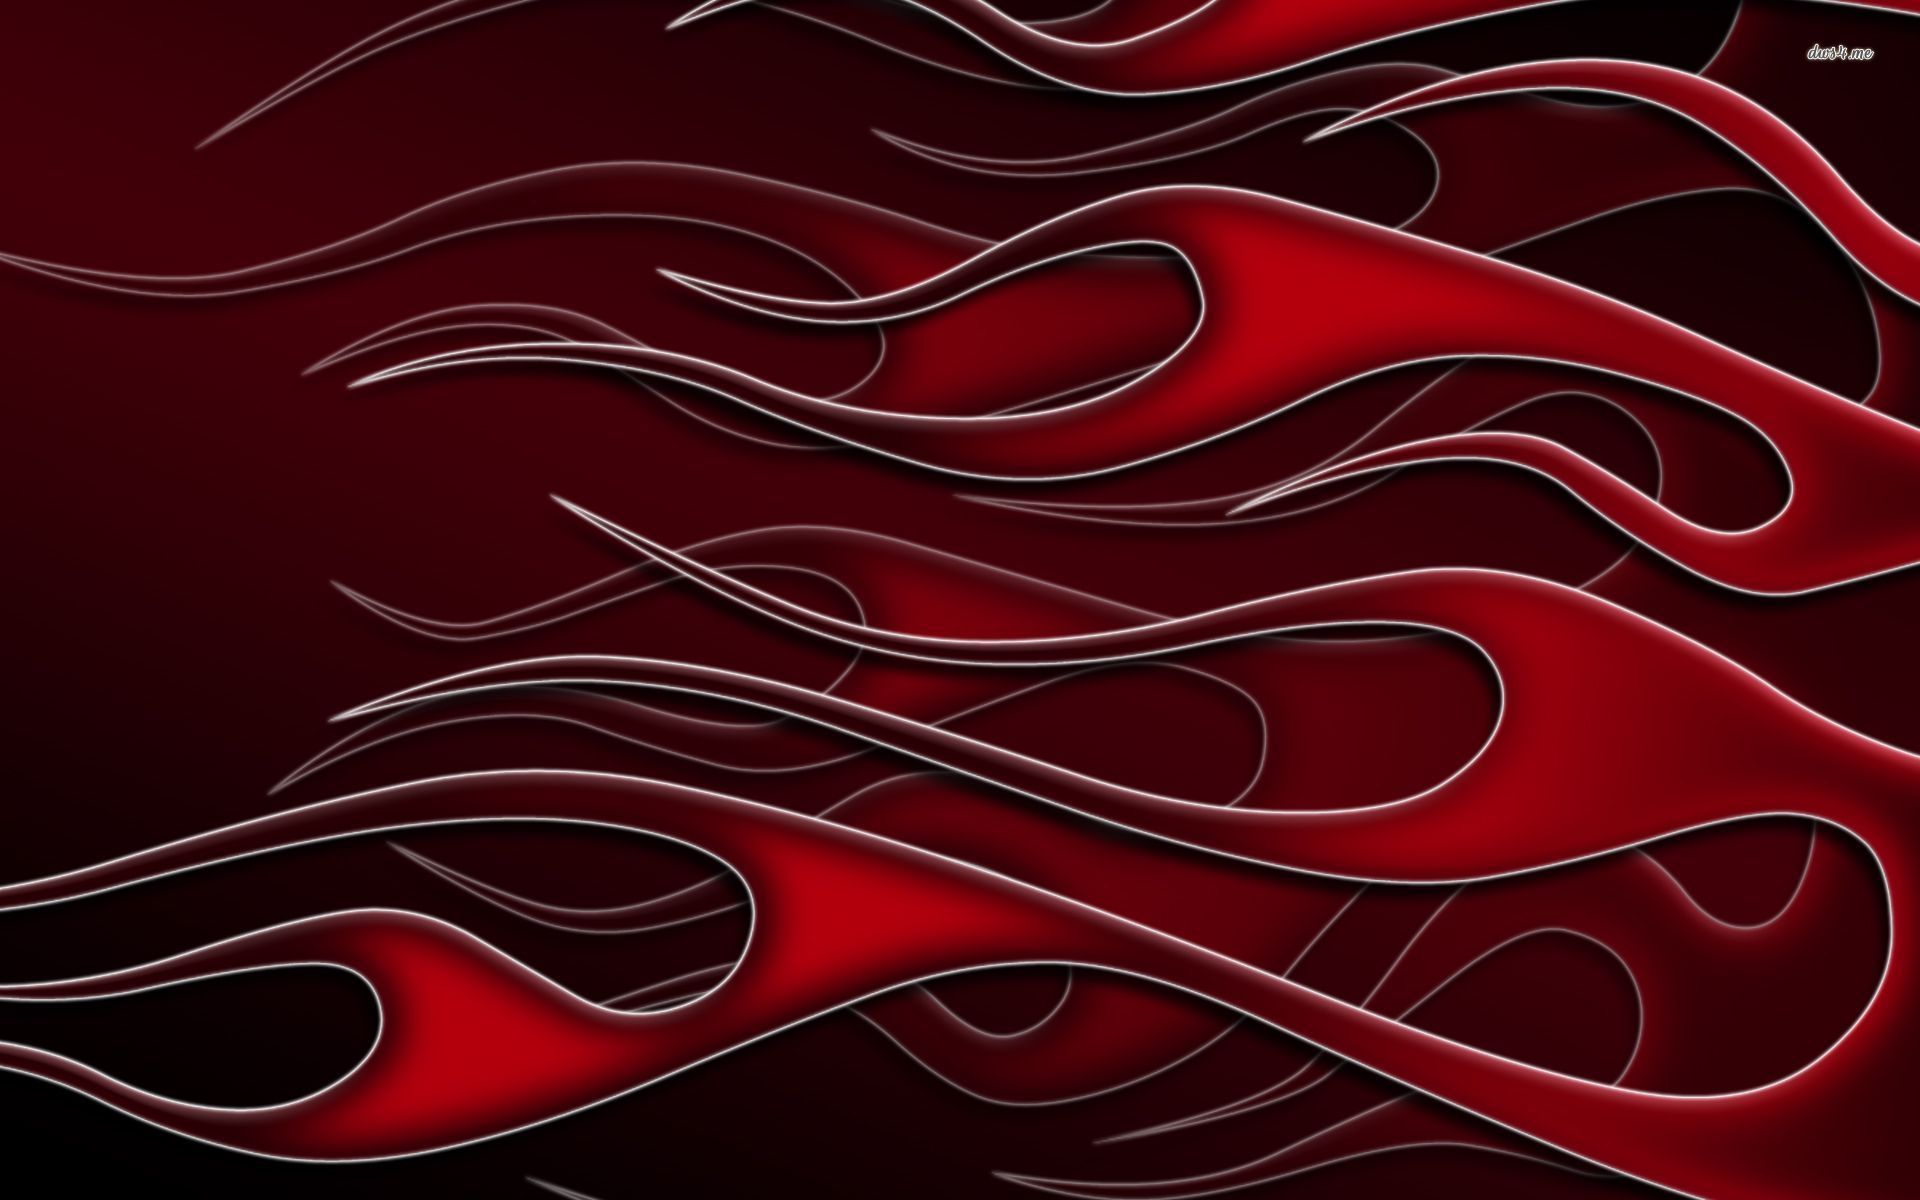 Red Flames wallpaper - Abstract wallpapers - #5256